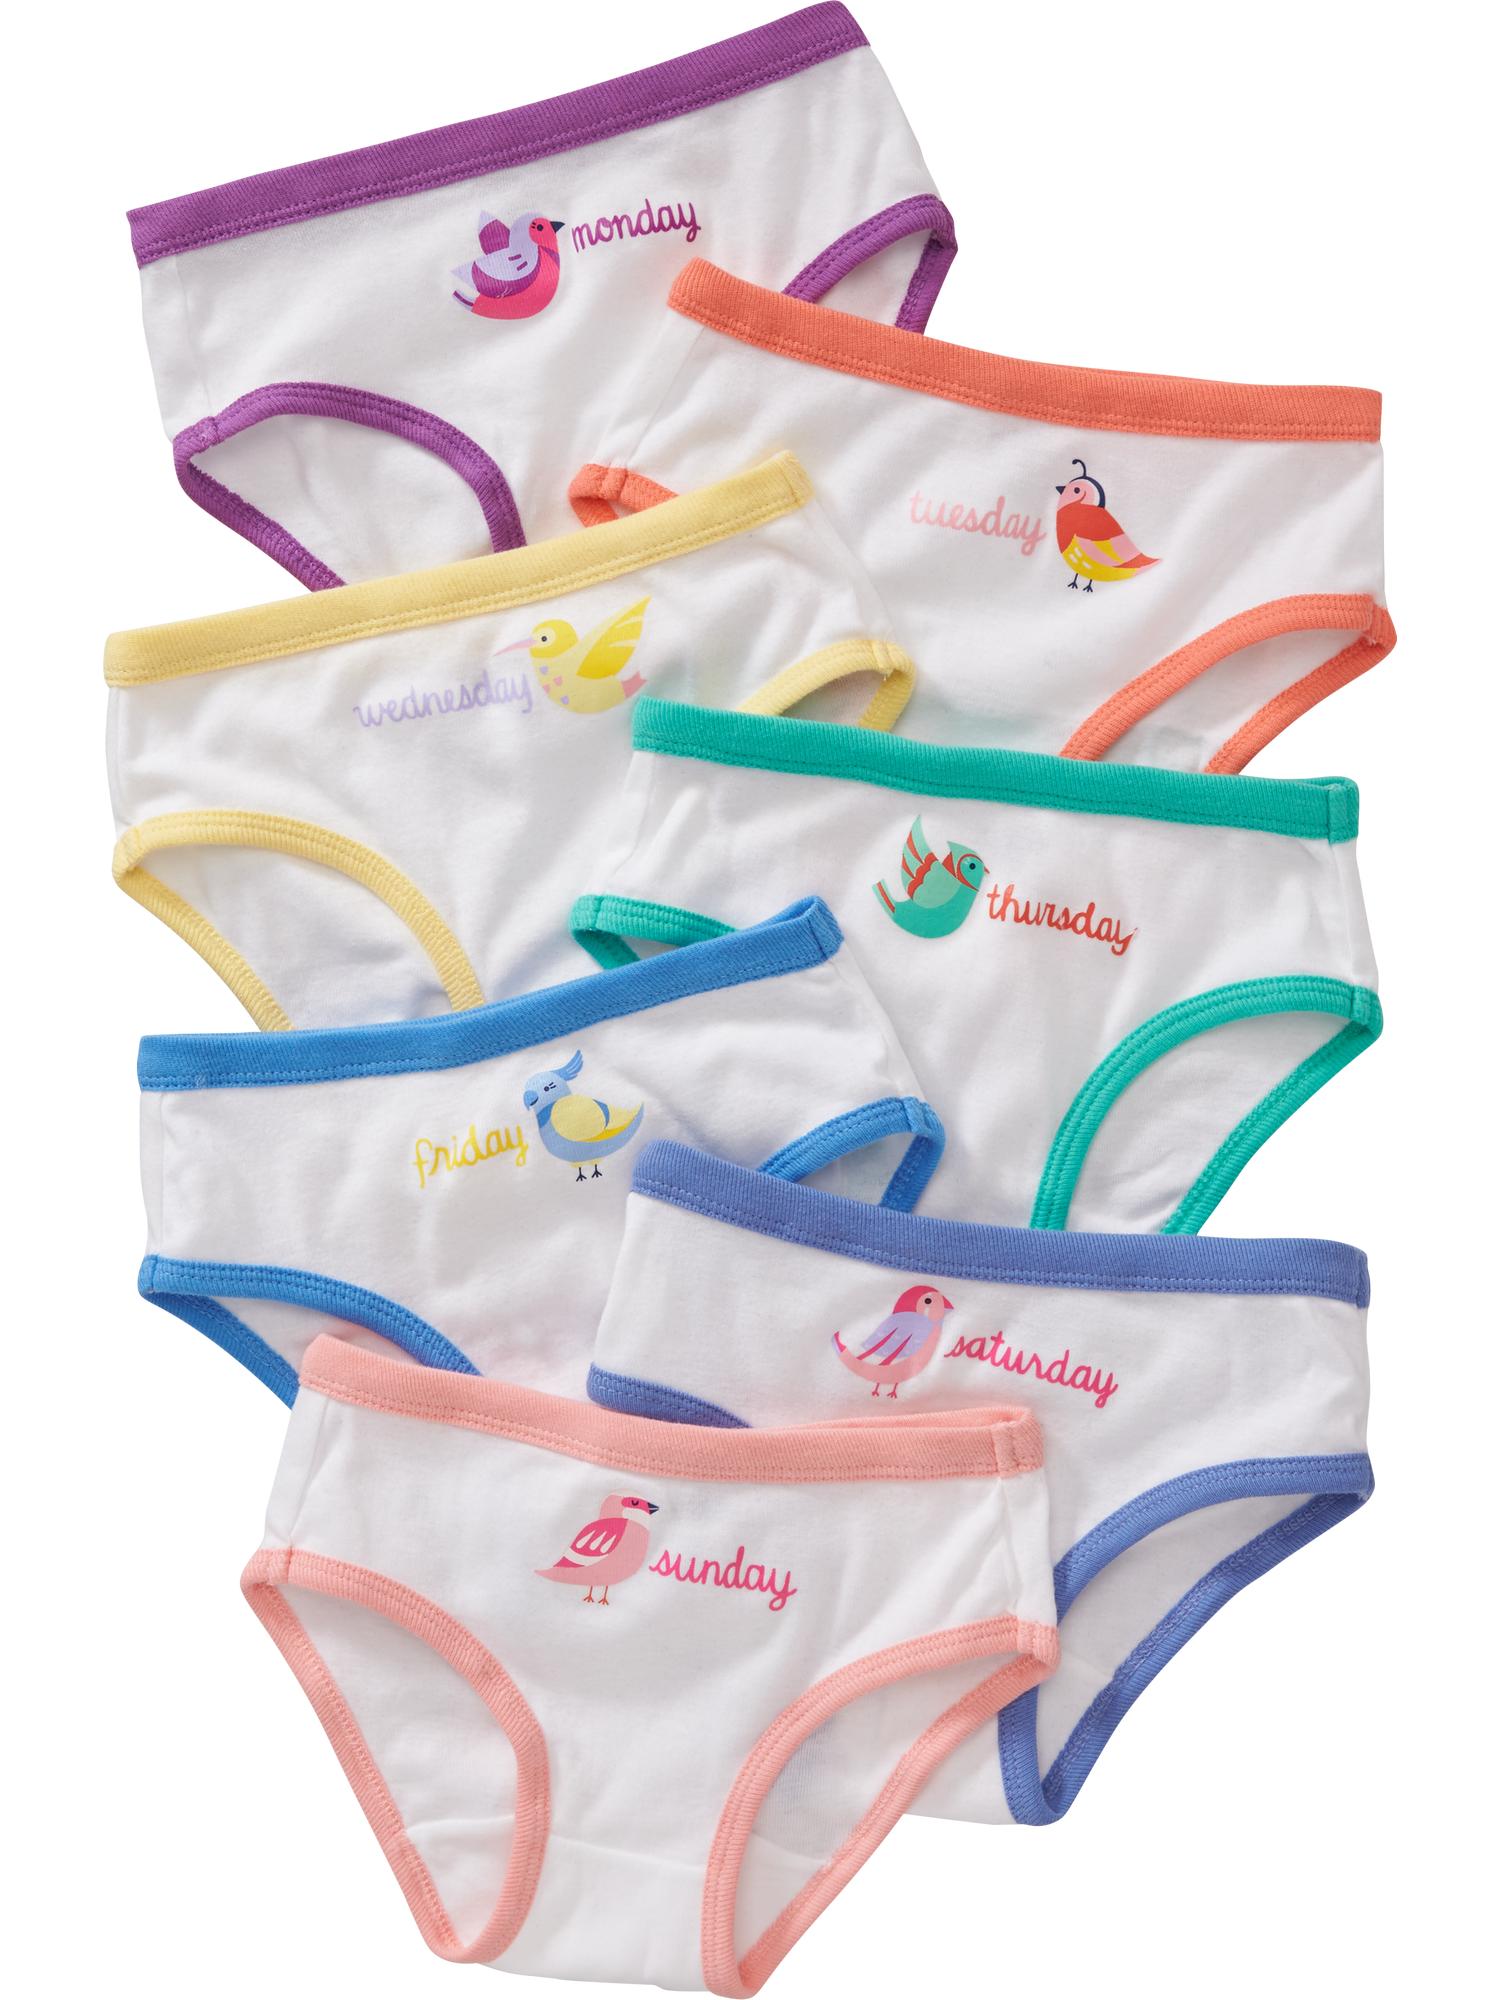 Day-of-the-Week Underwear 7-Packs for Baby